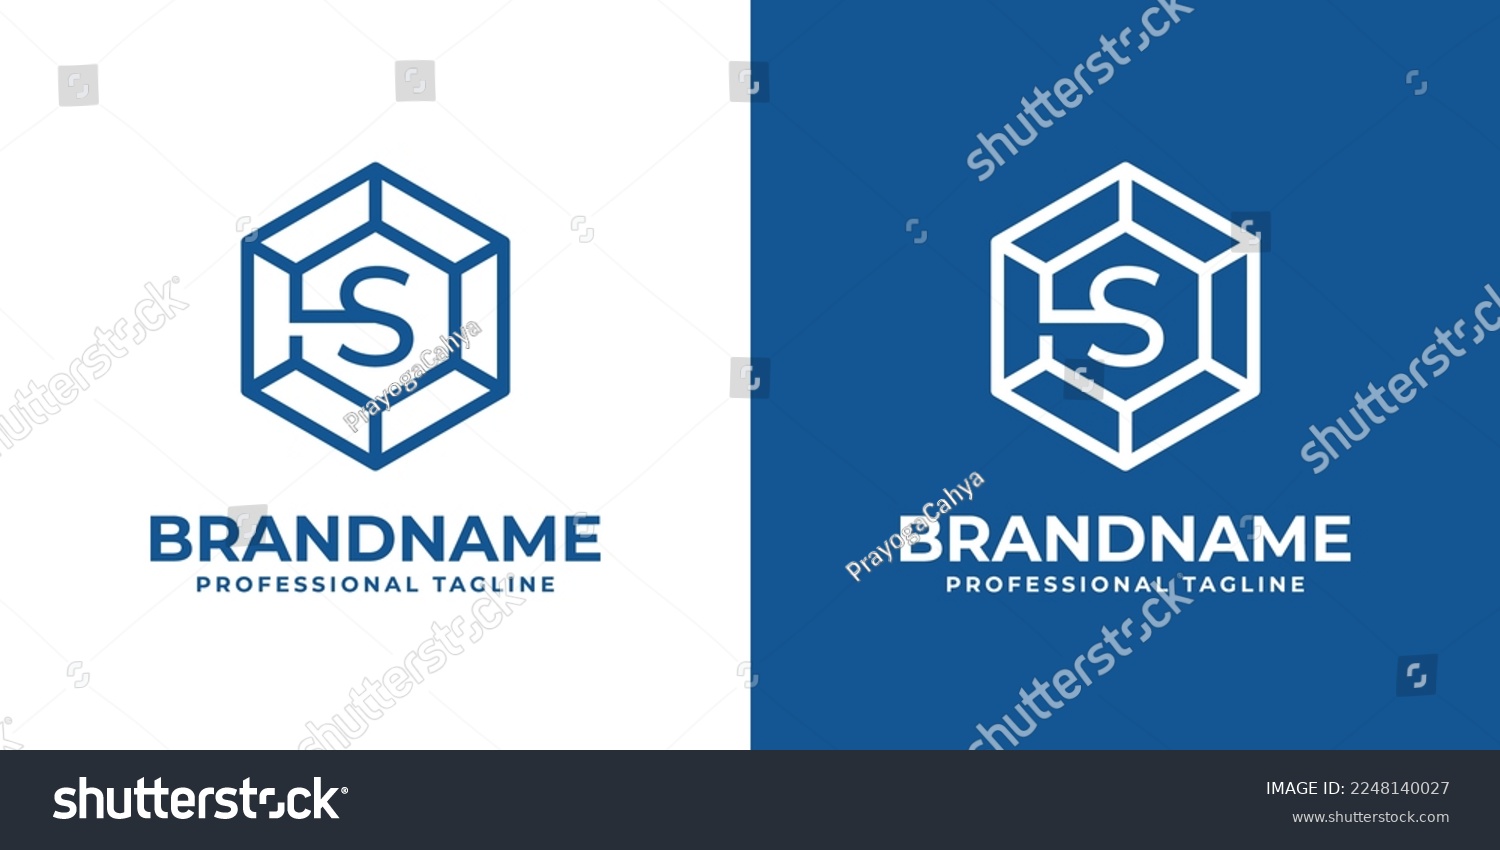 SVG of Initial S Hexagon Diamond Logo, suitable for any business with S initial. svg